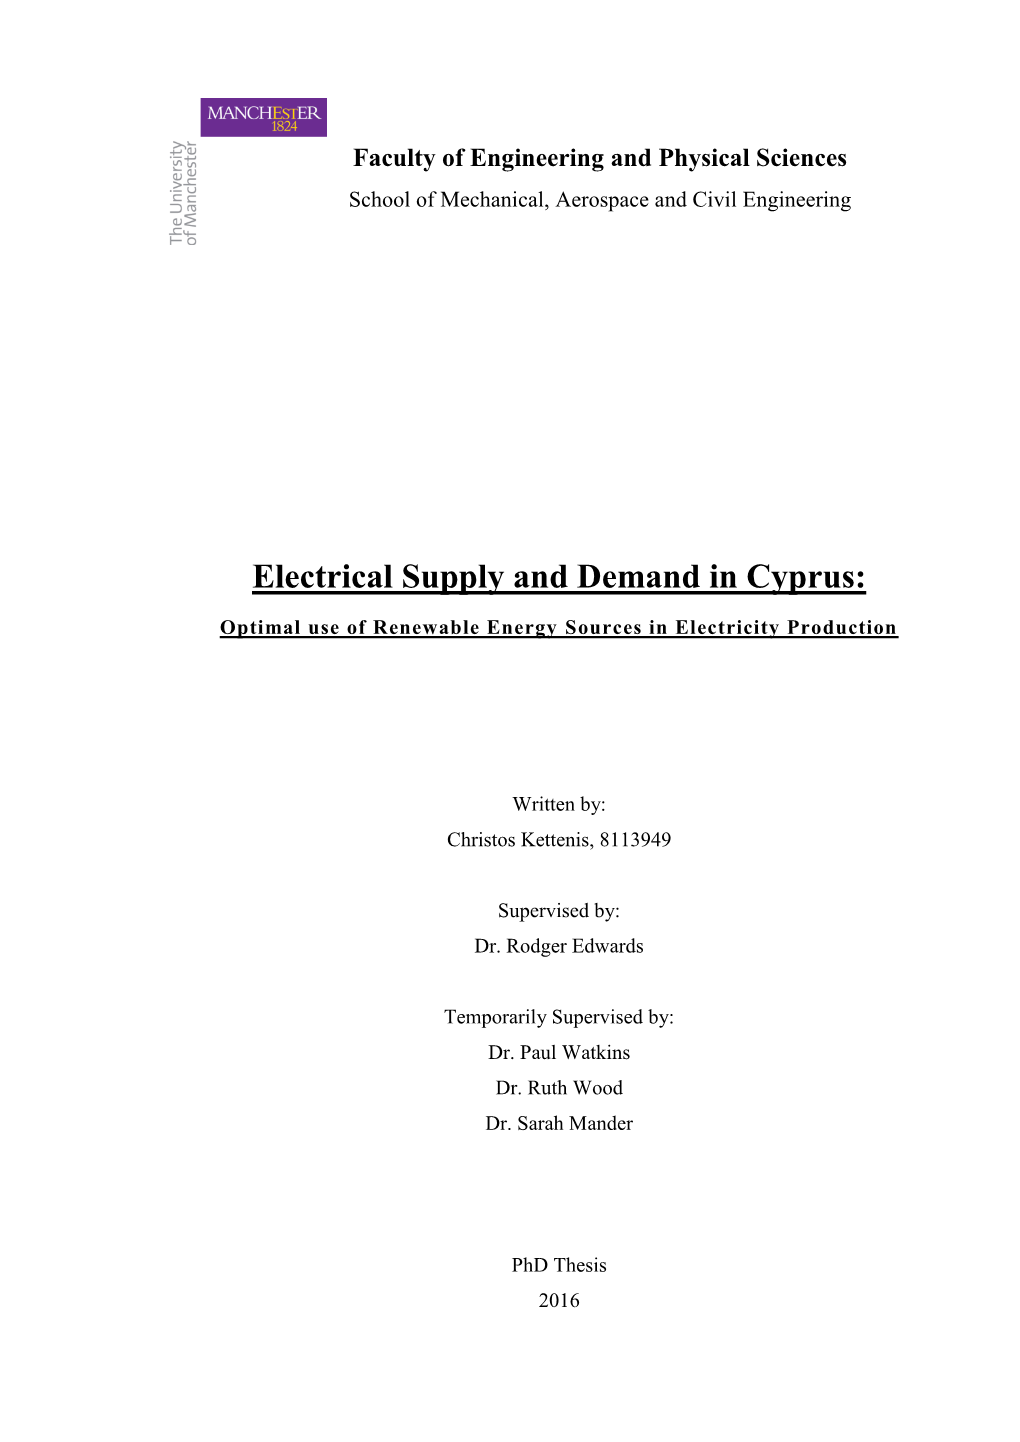 Electrical Supply and Demand in Cyprus